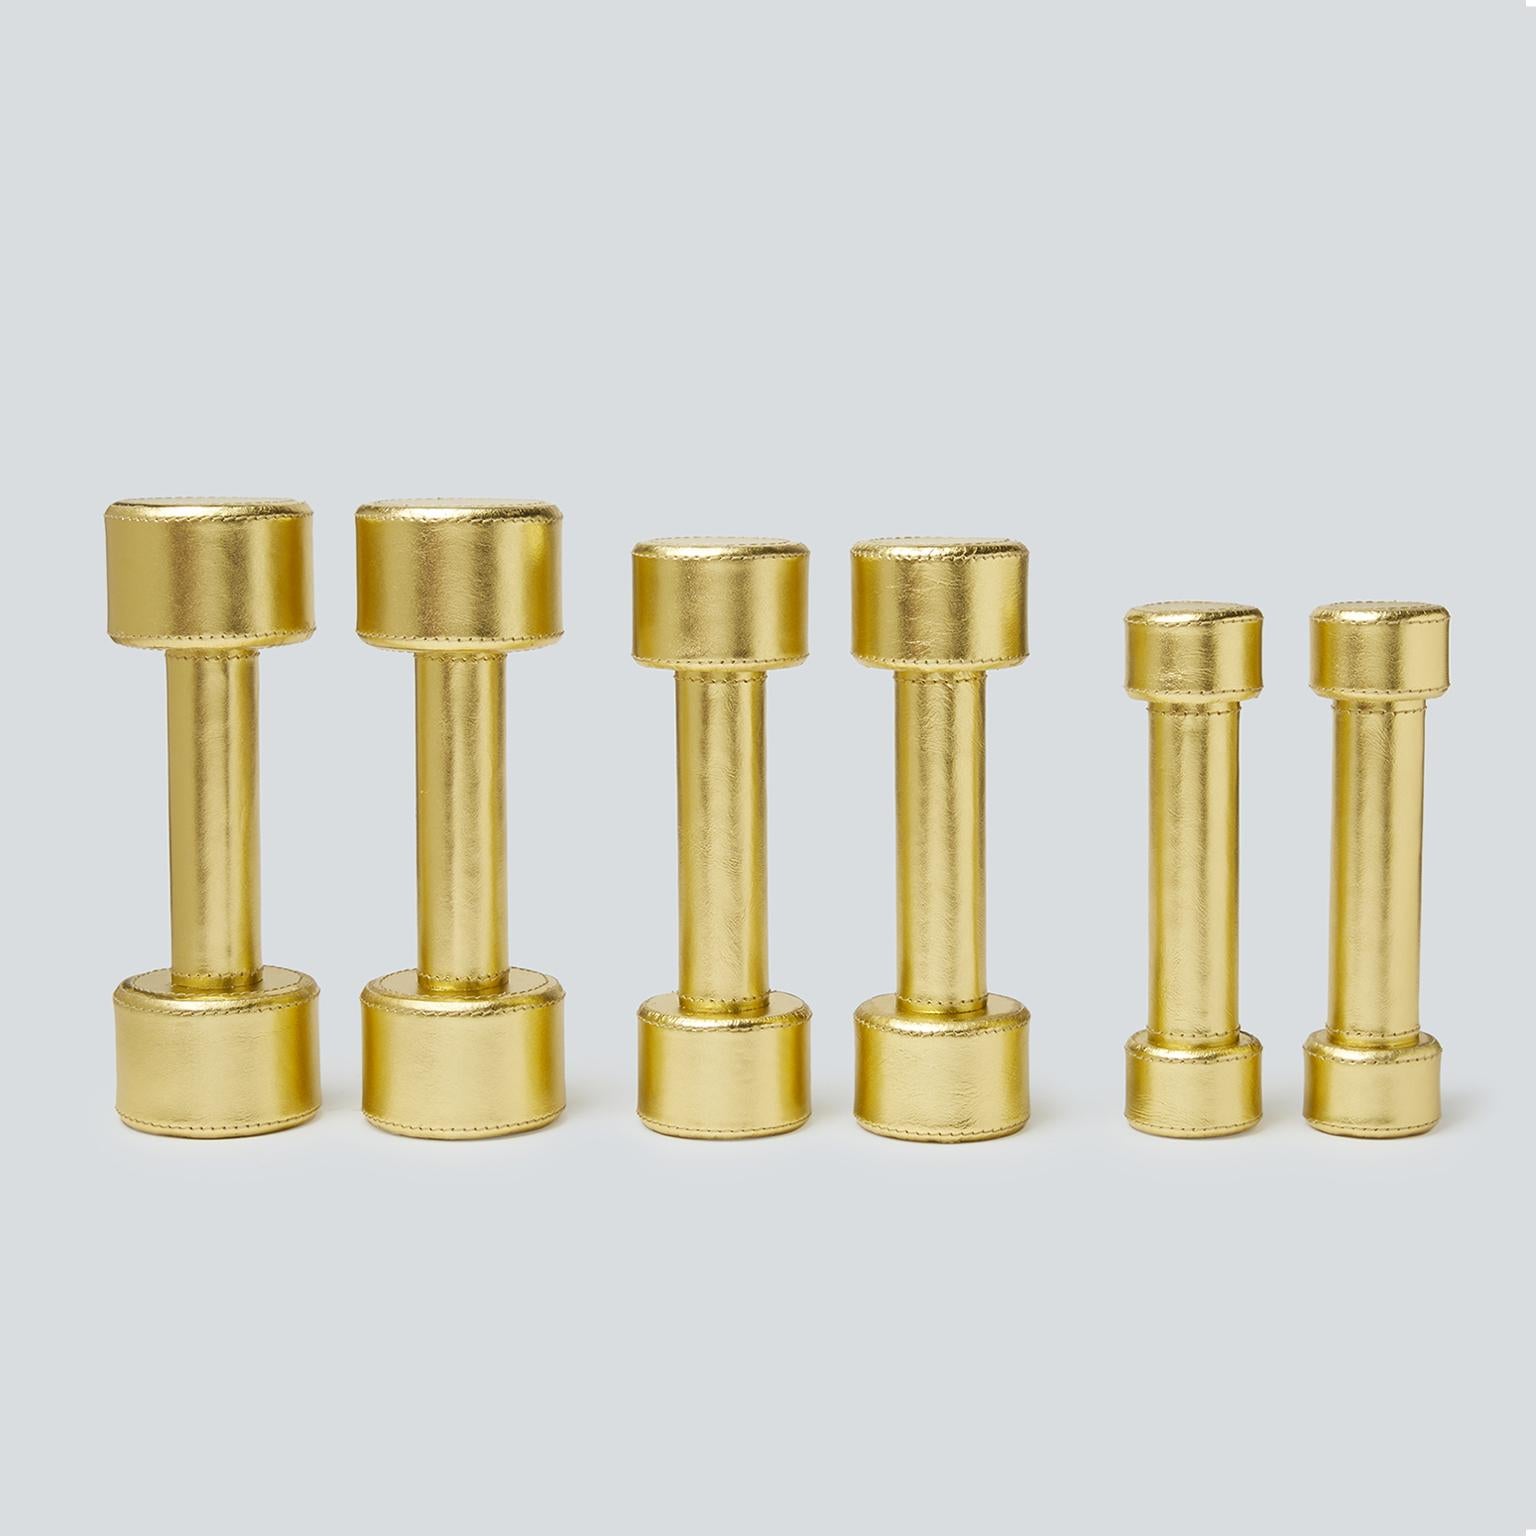 Hand-Crafted Dumbbell Set in Stainless Steel Covered in Gold Leather, Atelier Biagetti For Sale